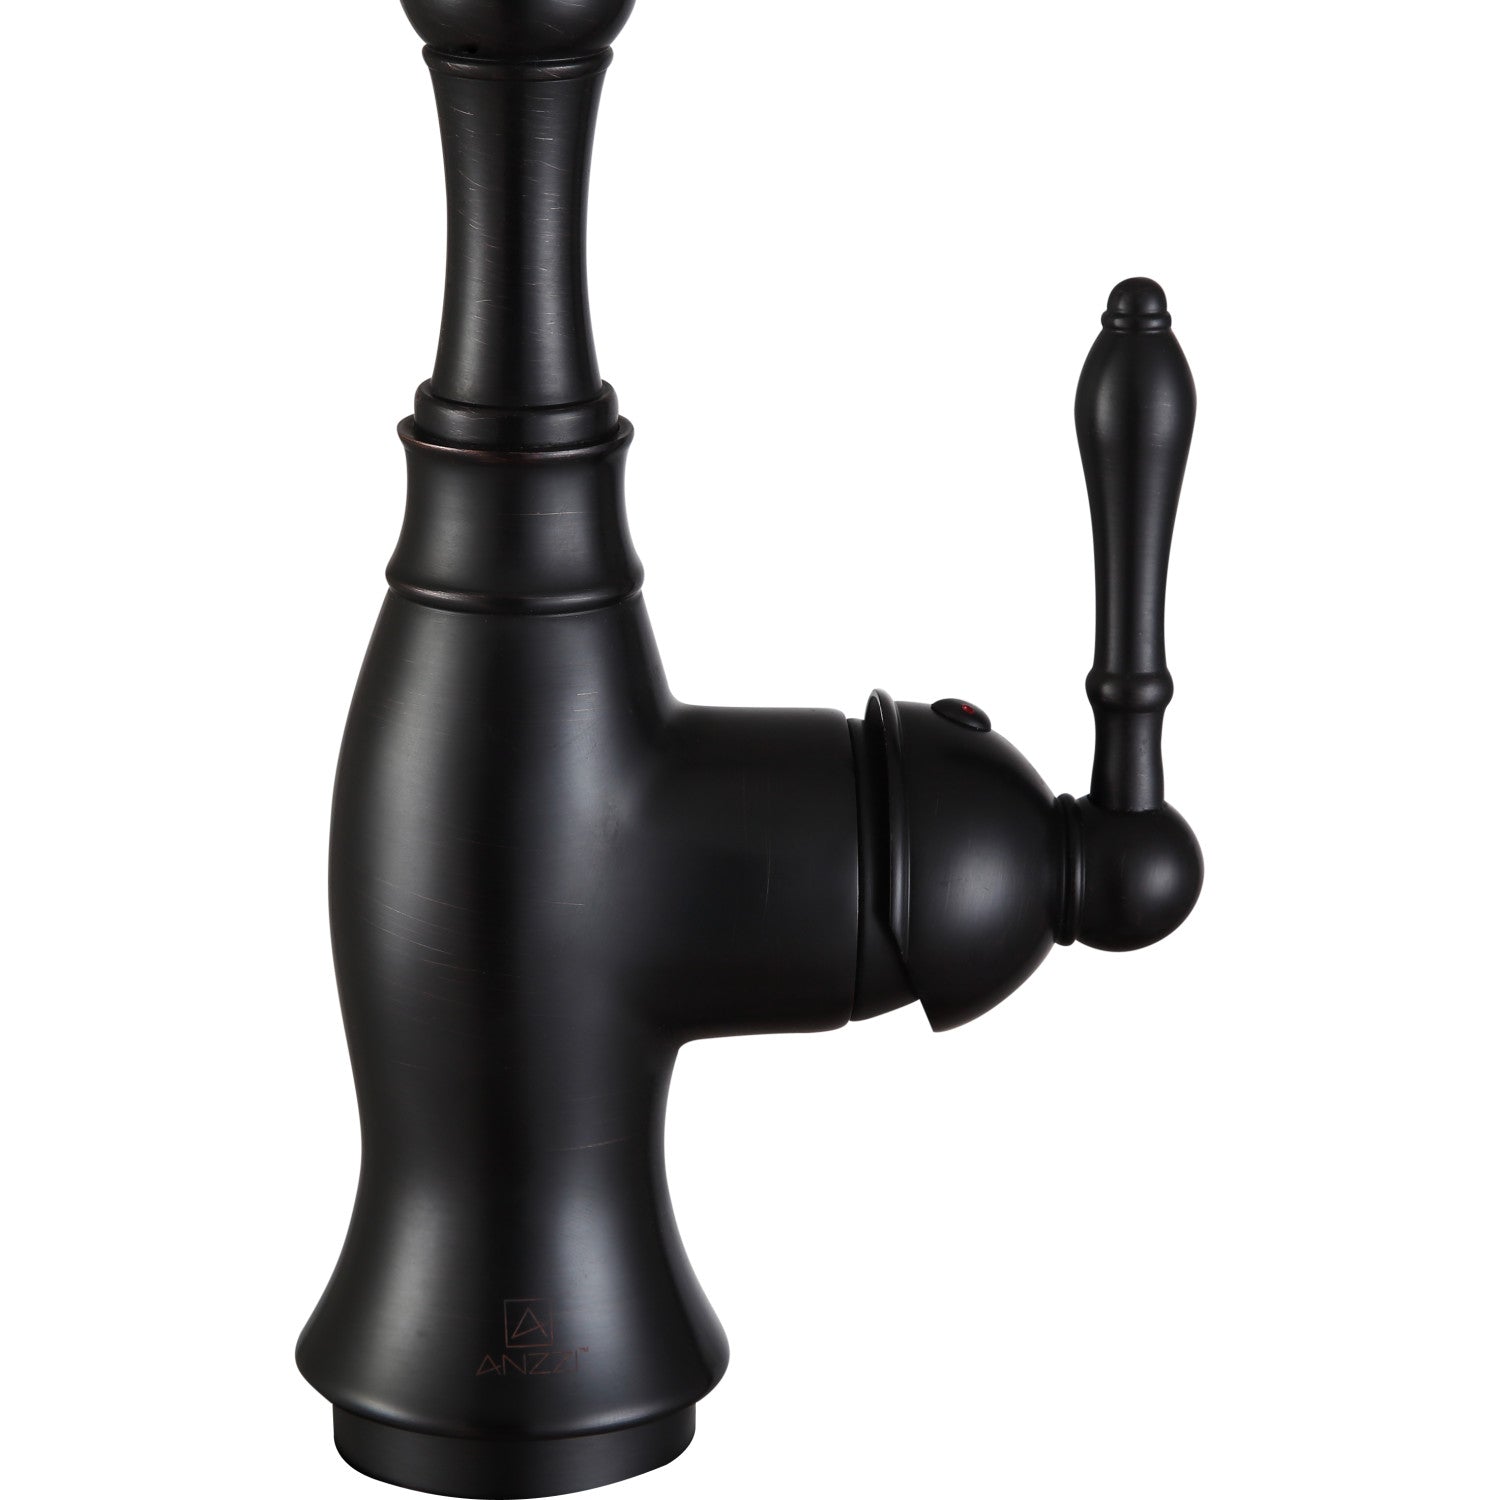 ANZZI Highland Series Single Hole Oil Rubbed Bronze Kitchen Faucet With Euro-Grip Pull Out Sprayer